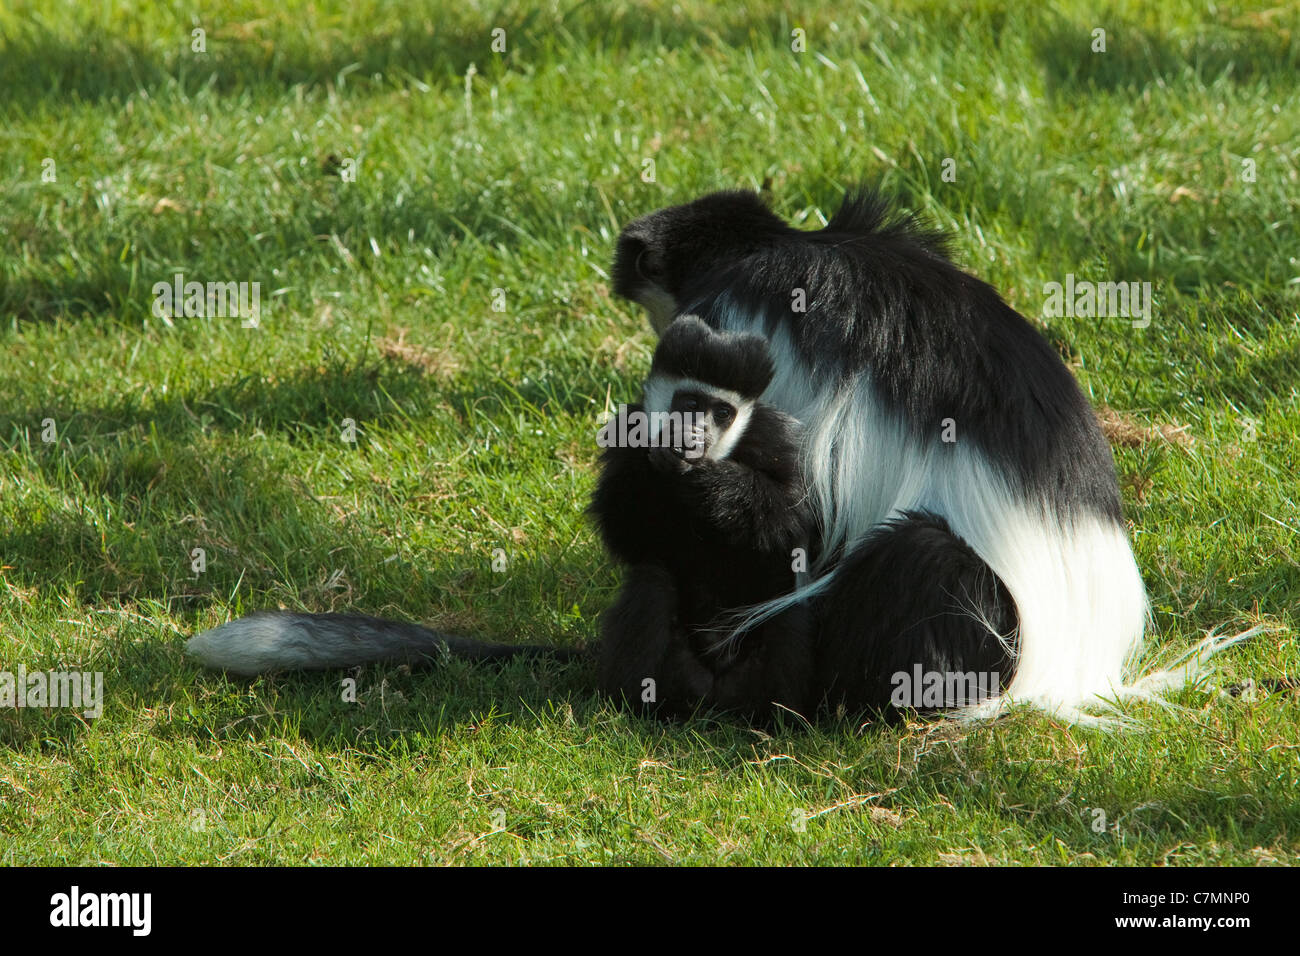 A baby and mother Black and white colobus monkey. Stock Photo